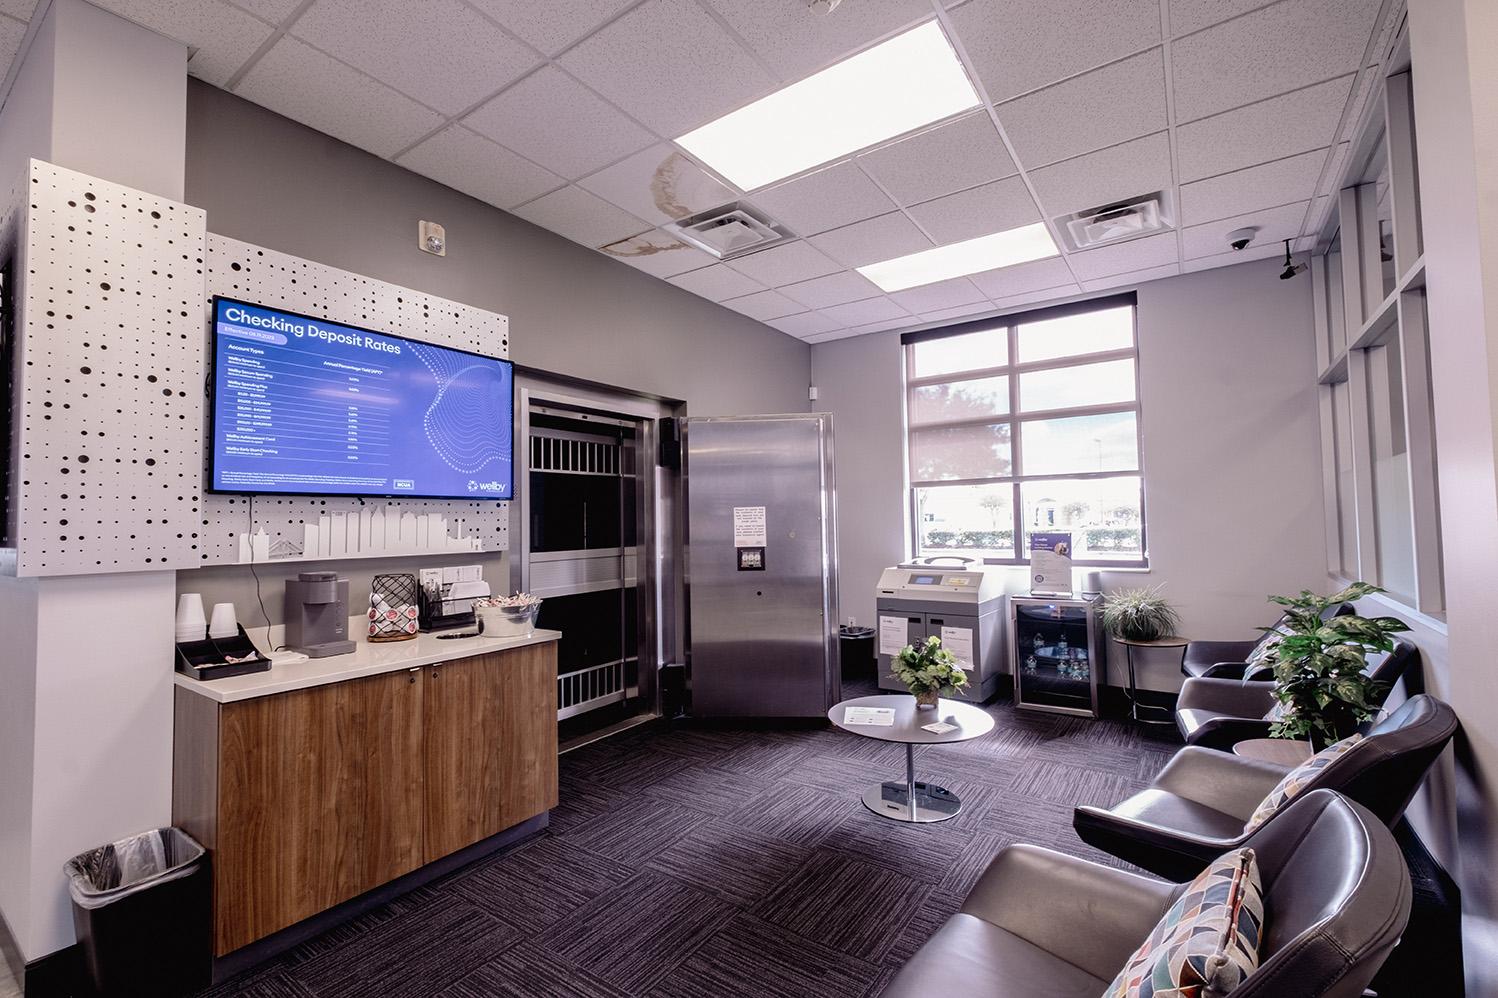 Interior of Wellby federal credit union with seating Wellby Financial Dickinson (281)488-7070